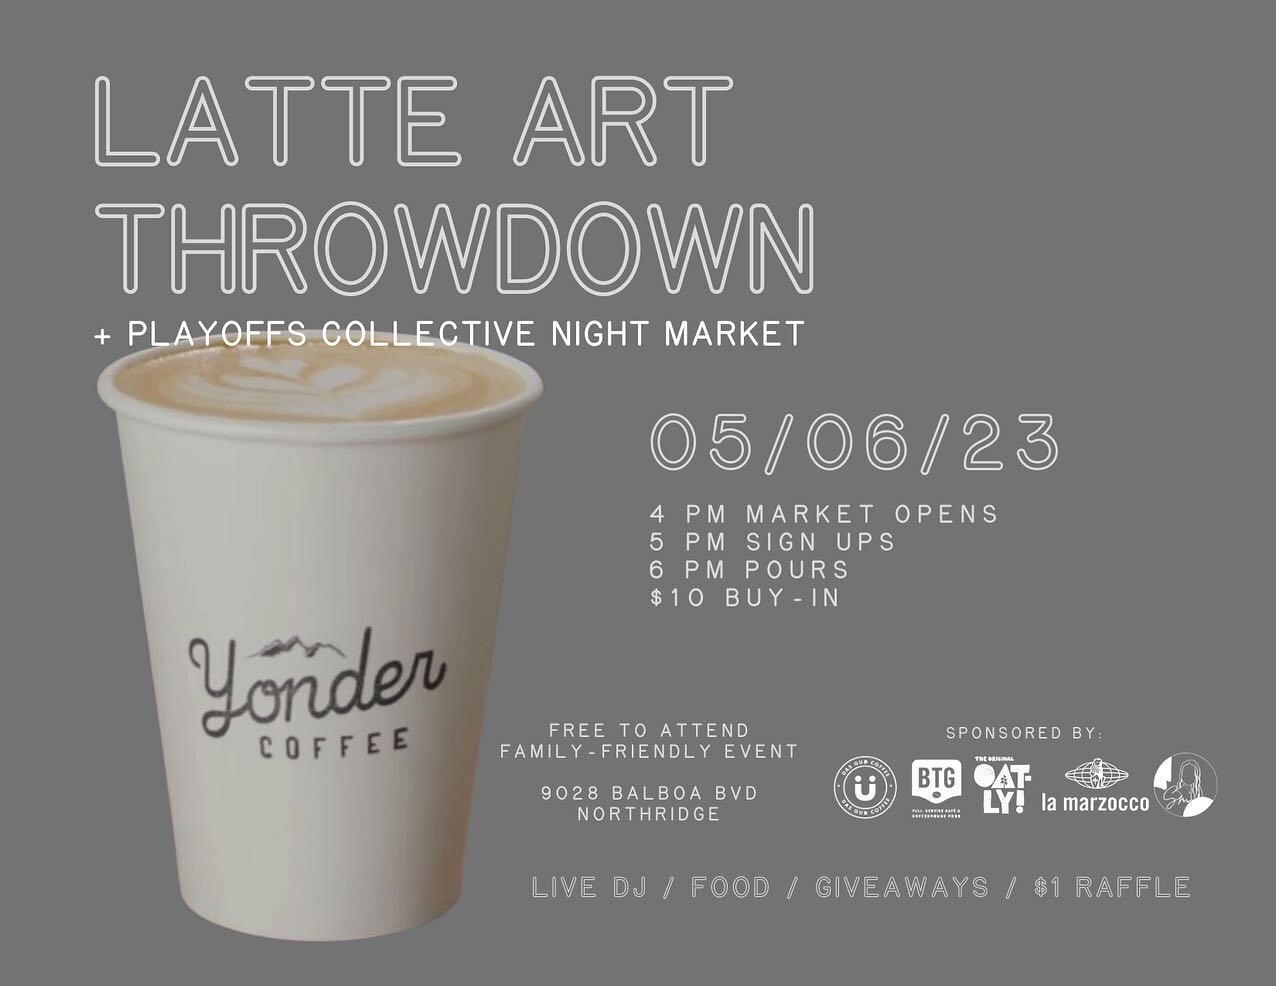 We&rsquo;re super excited to host our very first latte art throwdown here in the Valley. 🥳

Night market, live DJ, vendors, food, raffles, and a latte art throwdown! It&rsquo;s gonna be a great time! 🎉

Thanks to all of our sponsors. Swipe for a fu